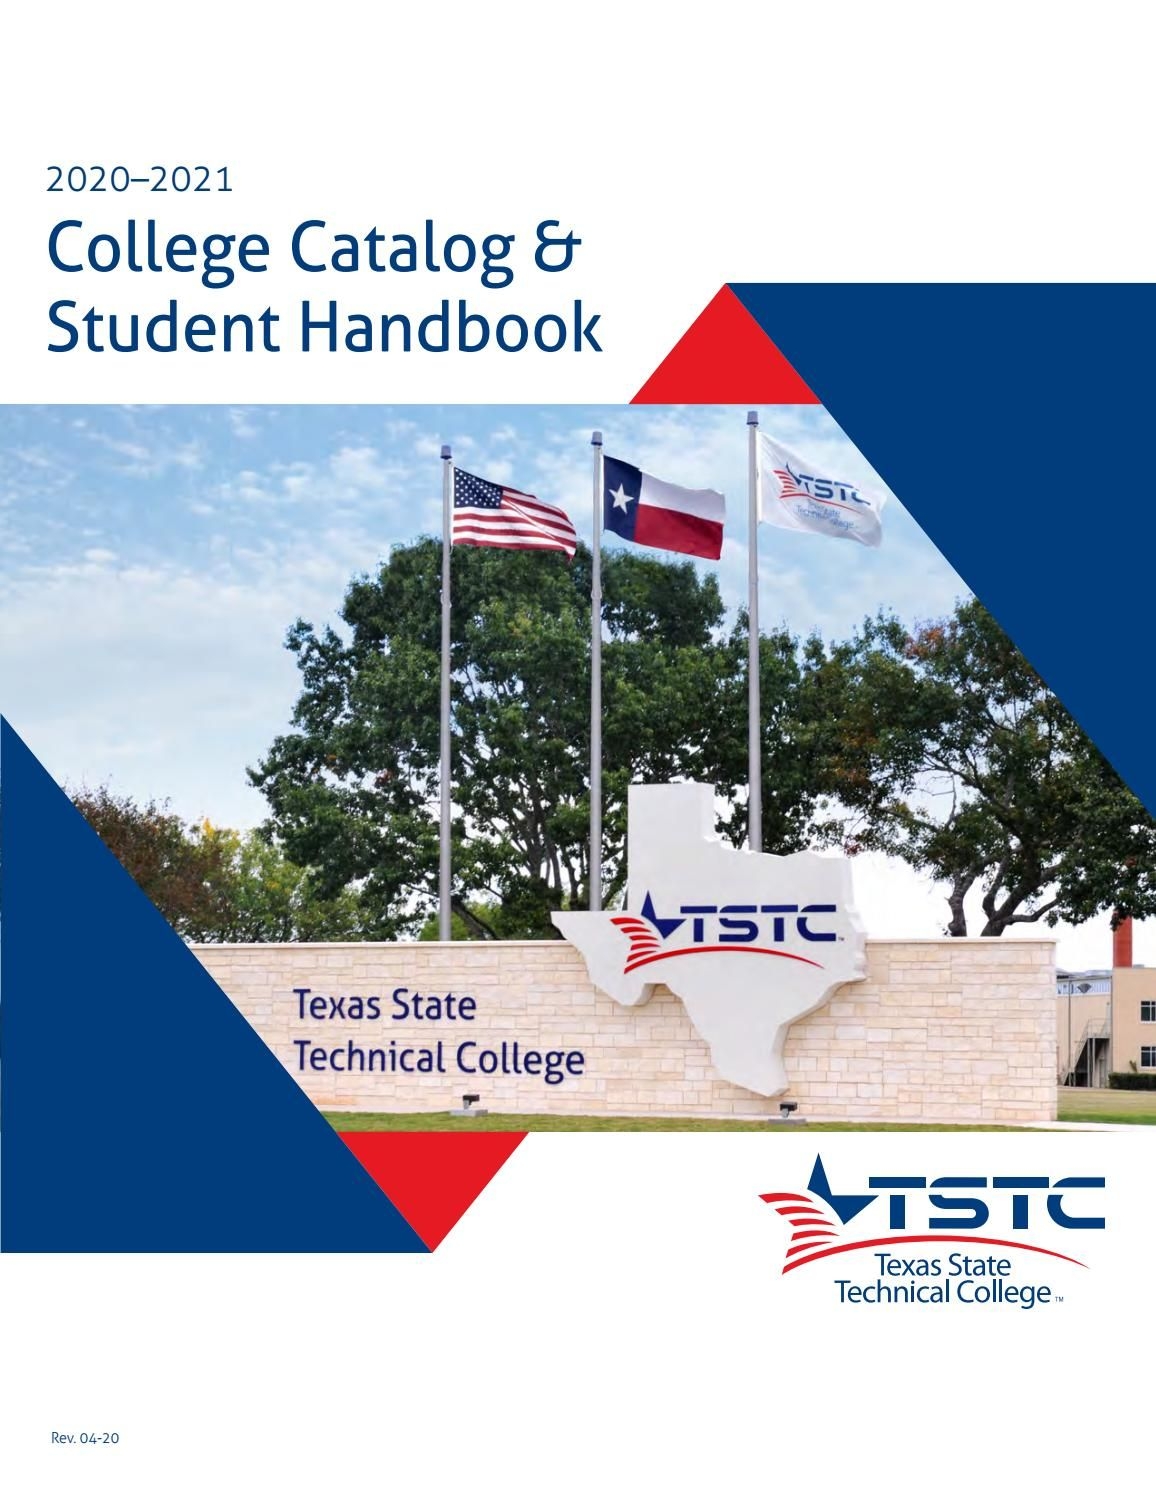 Tstc 2020-2021 Catalog And Student Handbook By Texas State